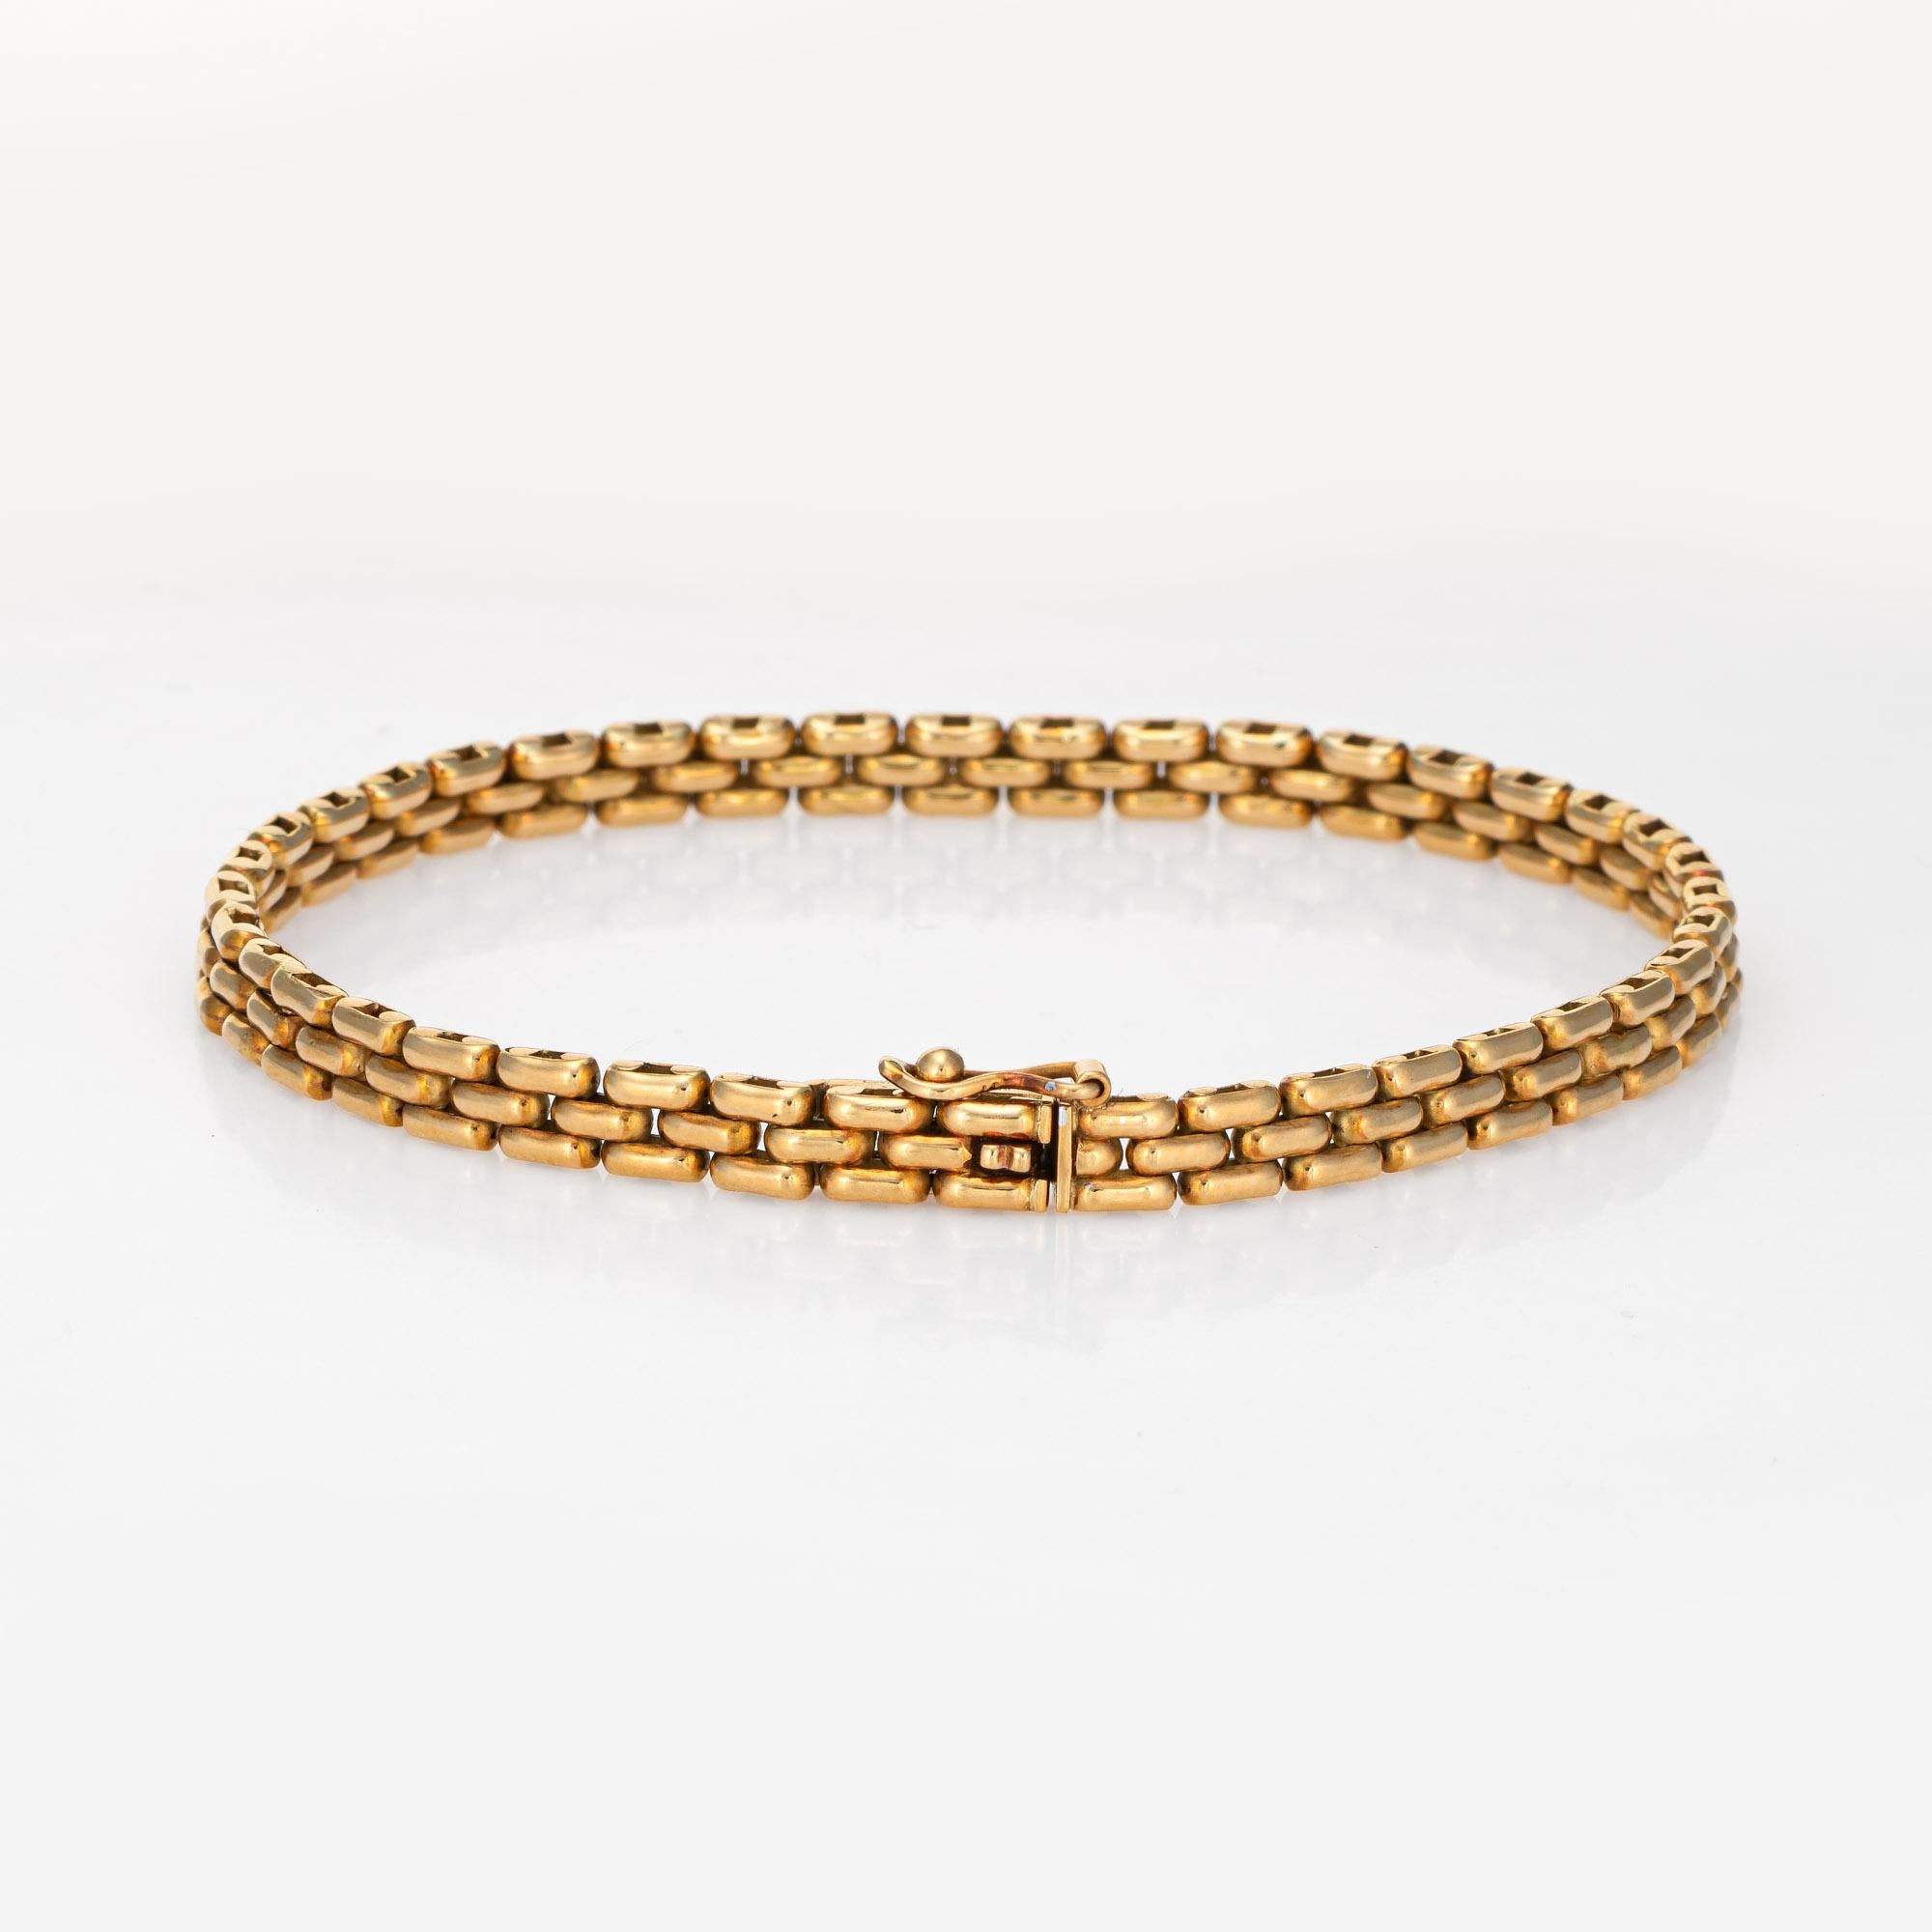 Stylish vintage Cartier Maillon Panthere bracelet crafted in 18 karat yellow gold.  

The slender 4.2mm (0.16 inch) bracelet is a Cartier classic. The bracelet is great worn alone or layered with your fine jewelry from any era. 

The bracelet is in